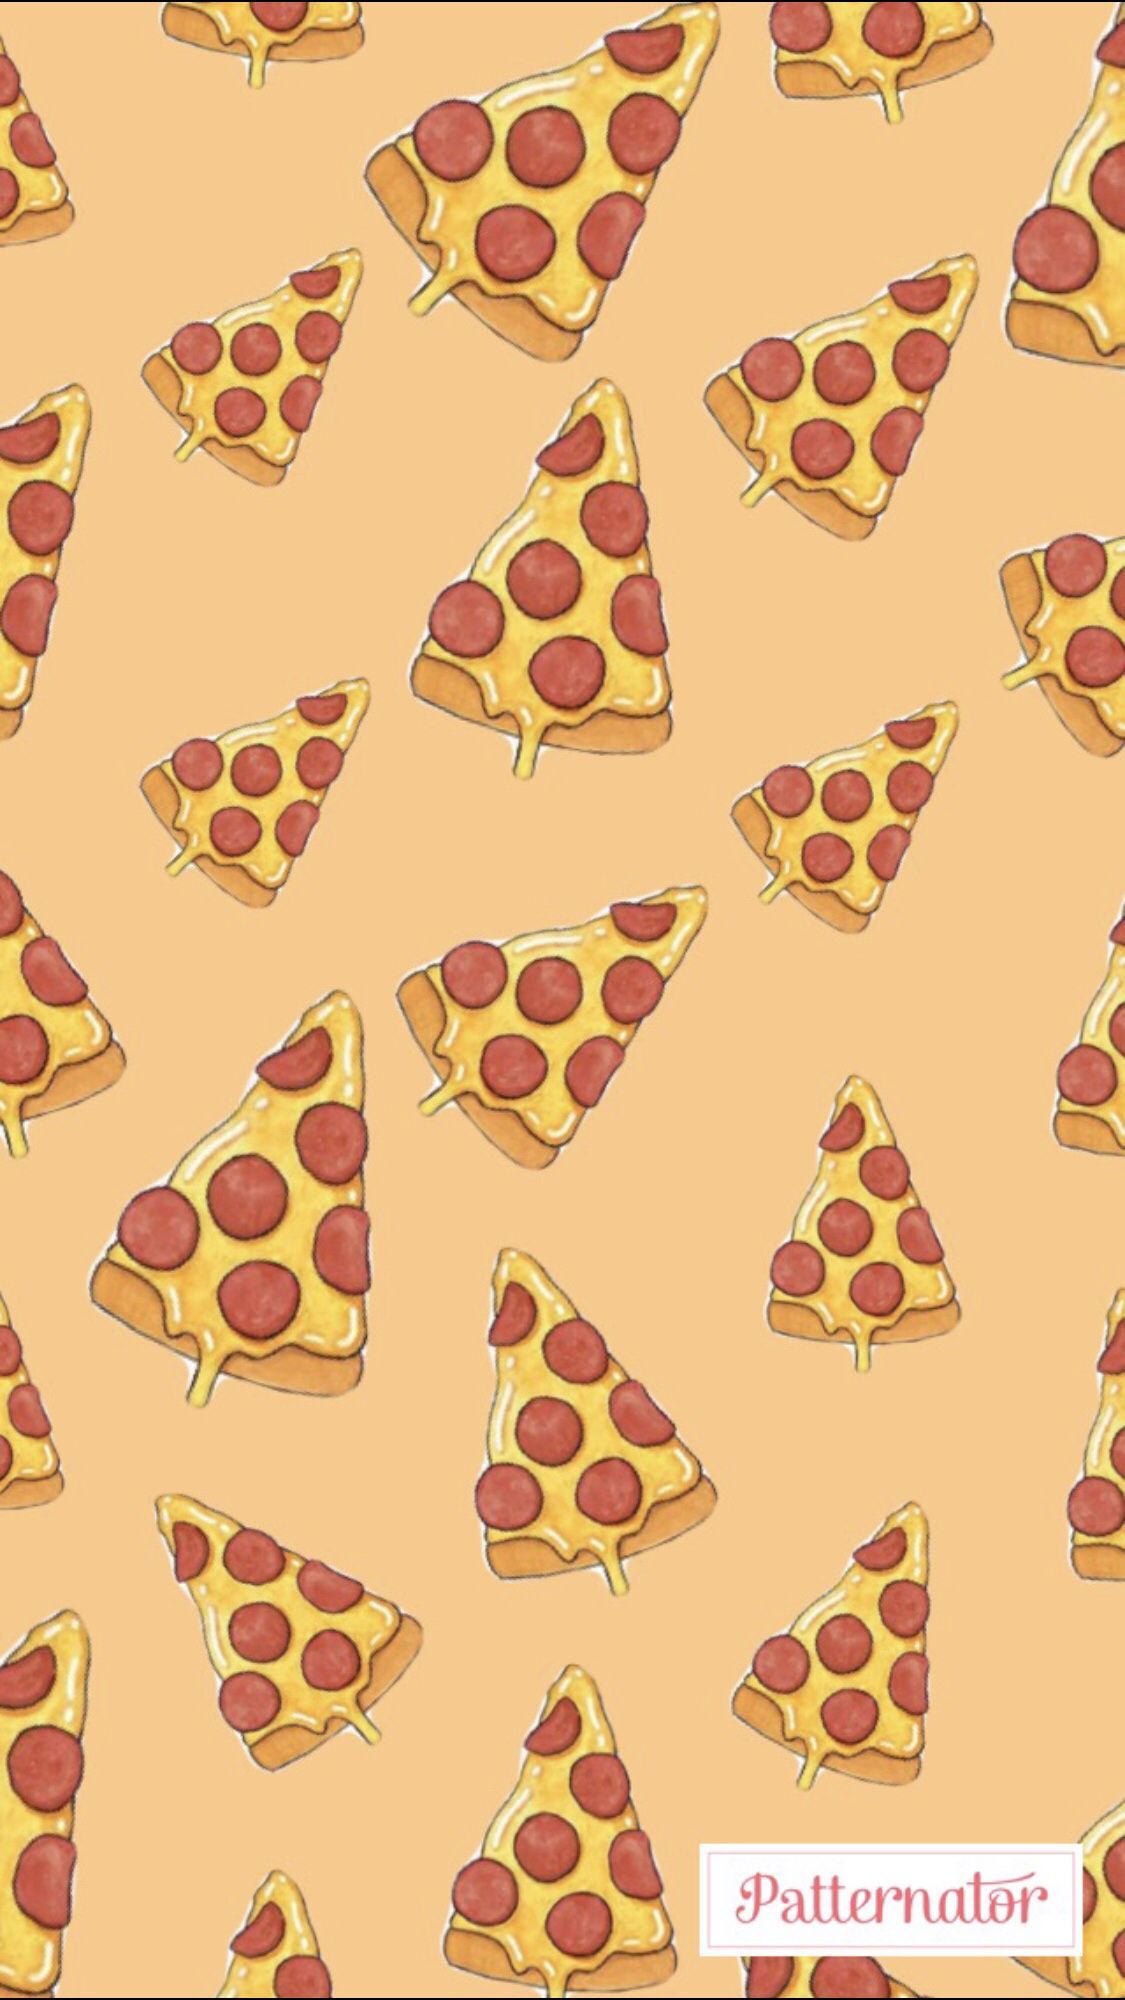 Pizza wallpaper made with patternator. Pizza wallpaper, Cute pizza, Cute emoji wallpaper